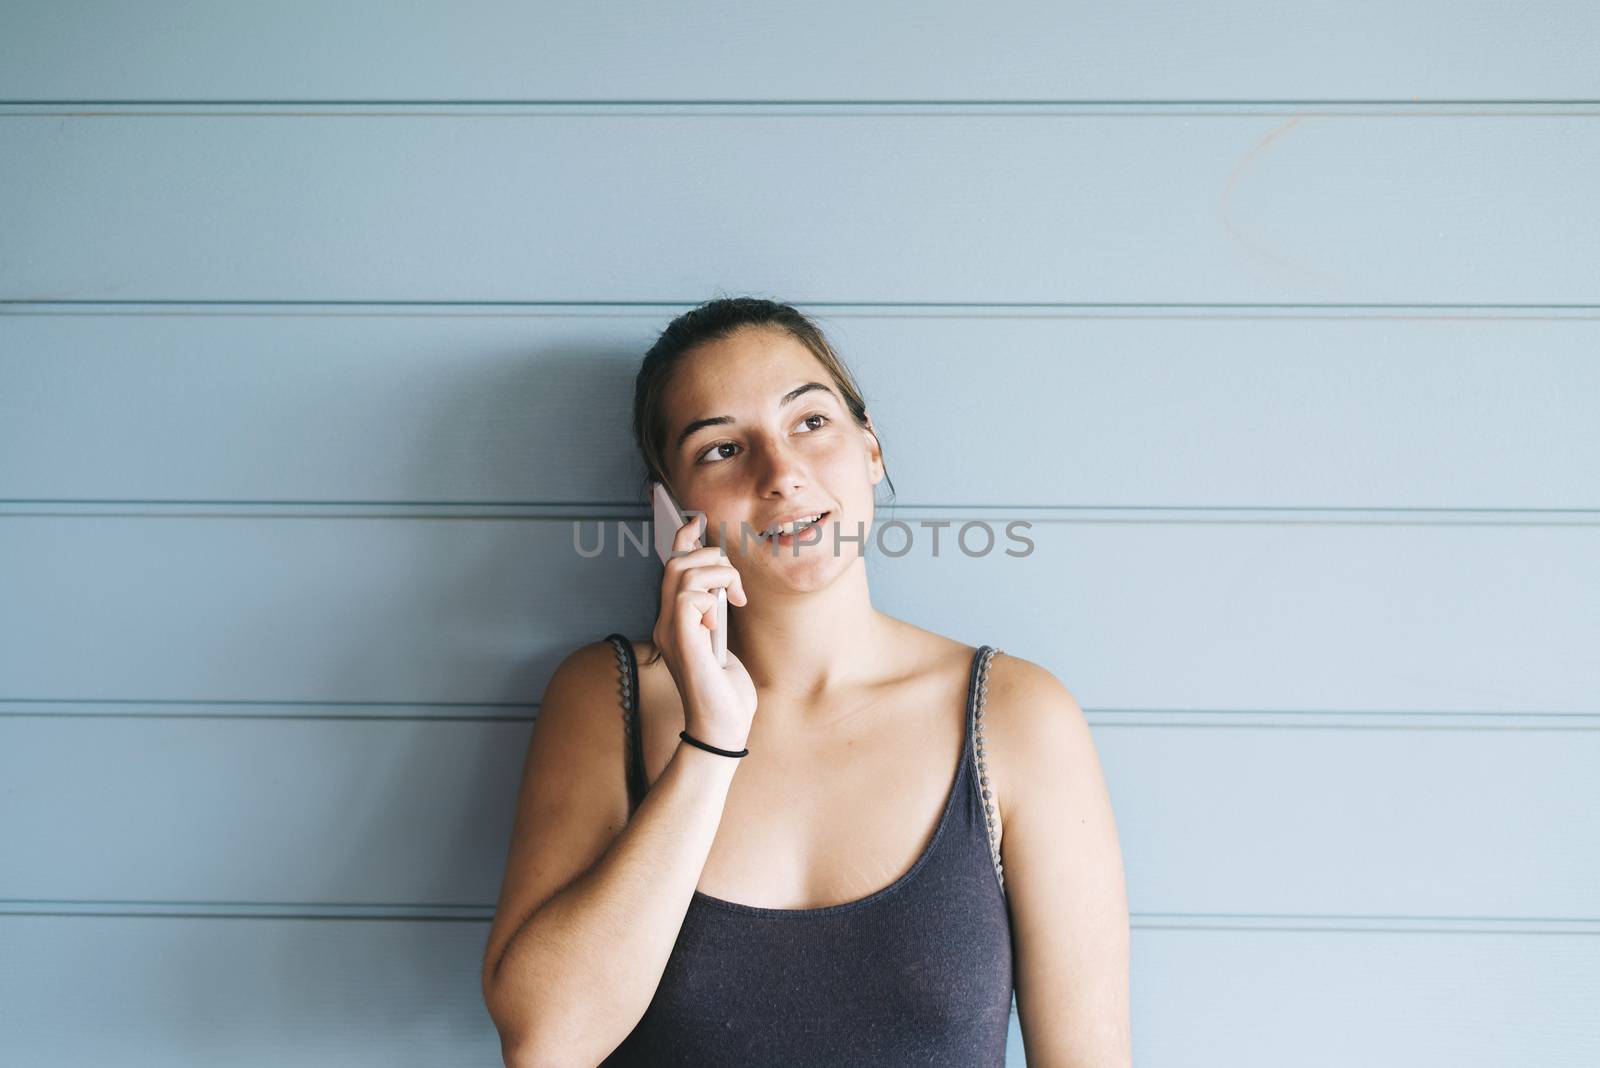 Young adult female in summer dress talking on cell phone while leaning against wood paneled wall by raferto1973